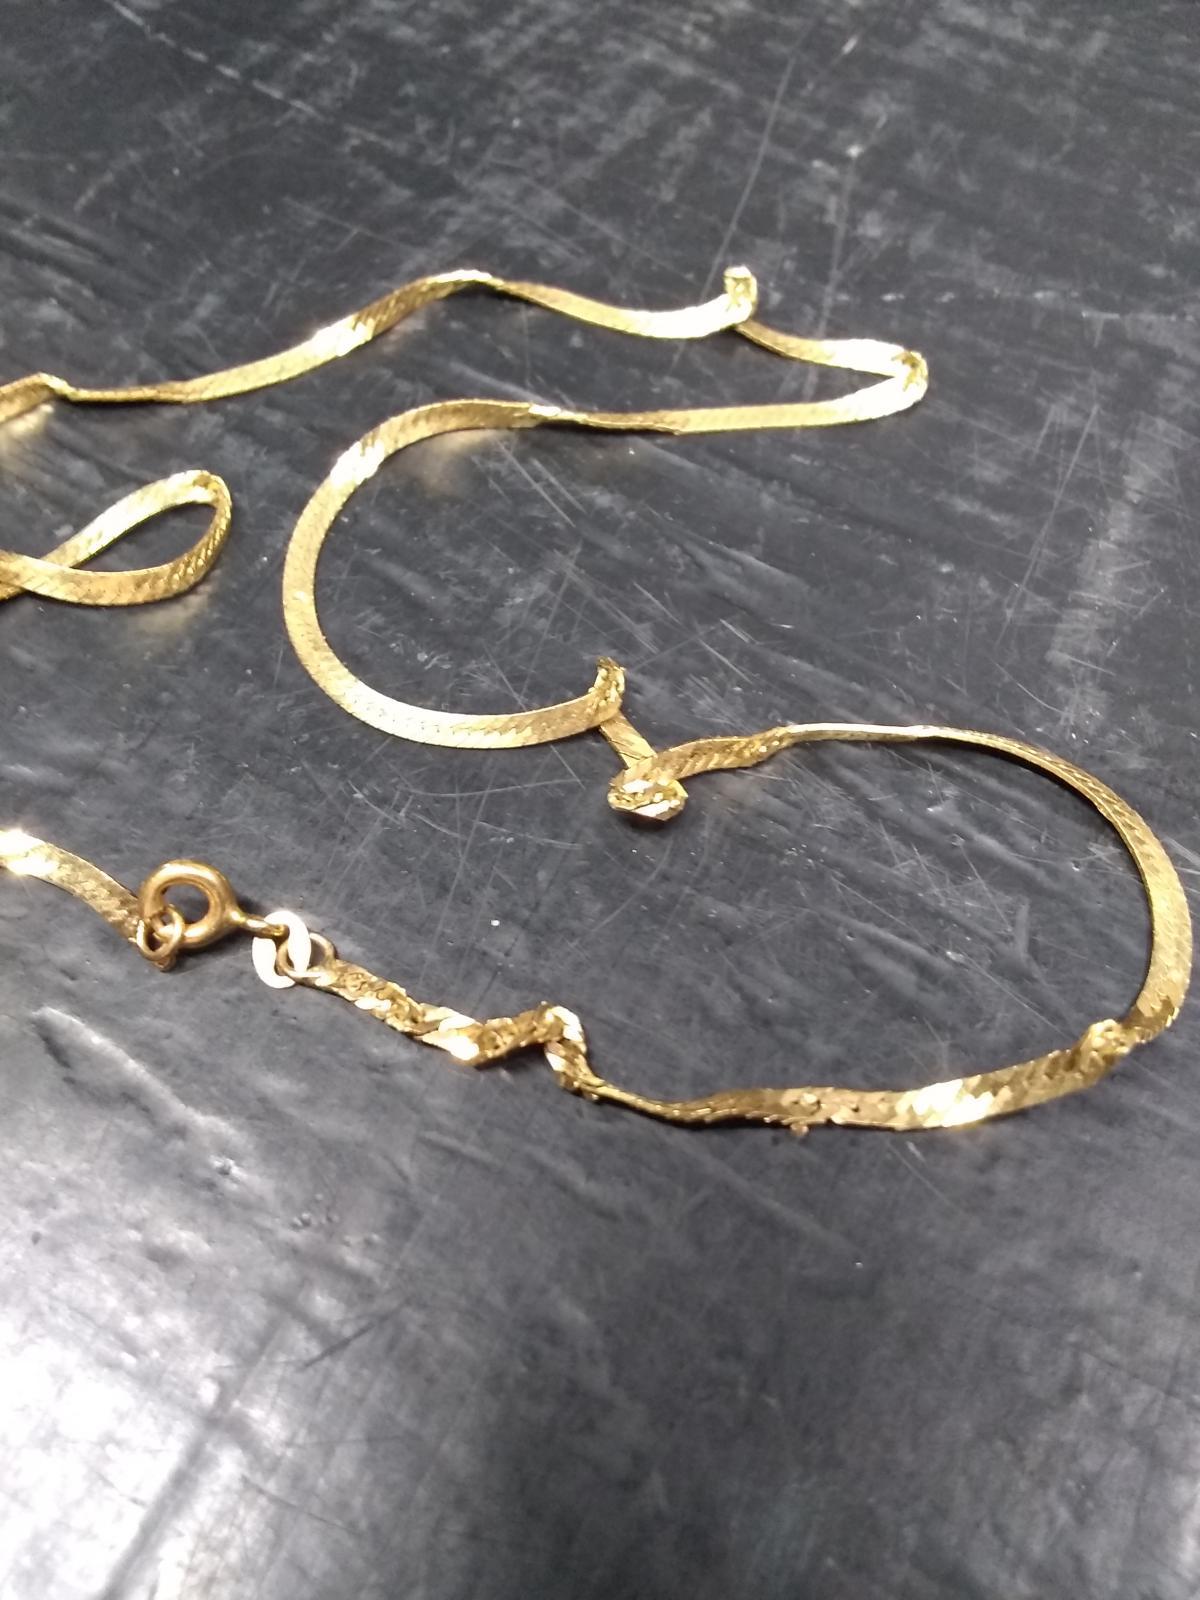 14kt Gold Italy Serpentine Necklace (as marked)